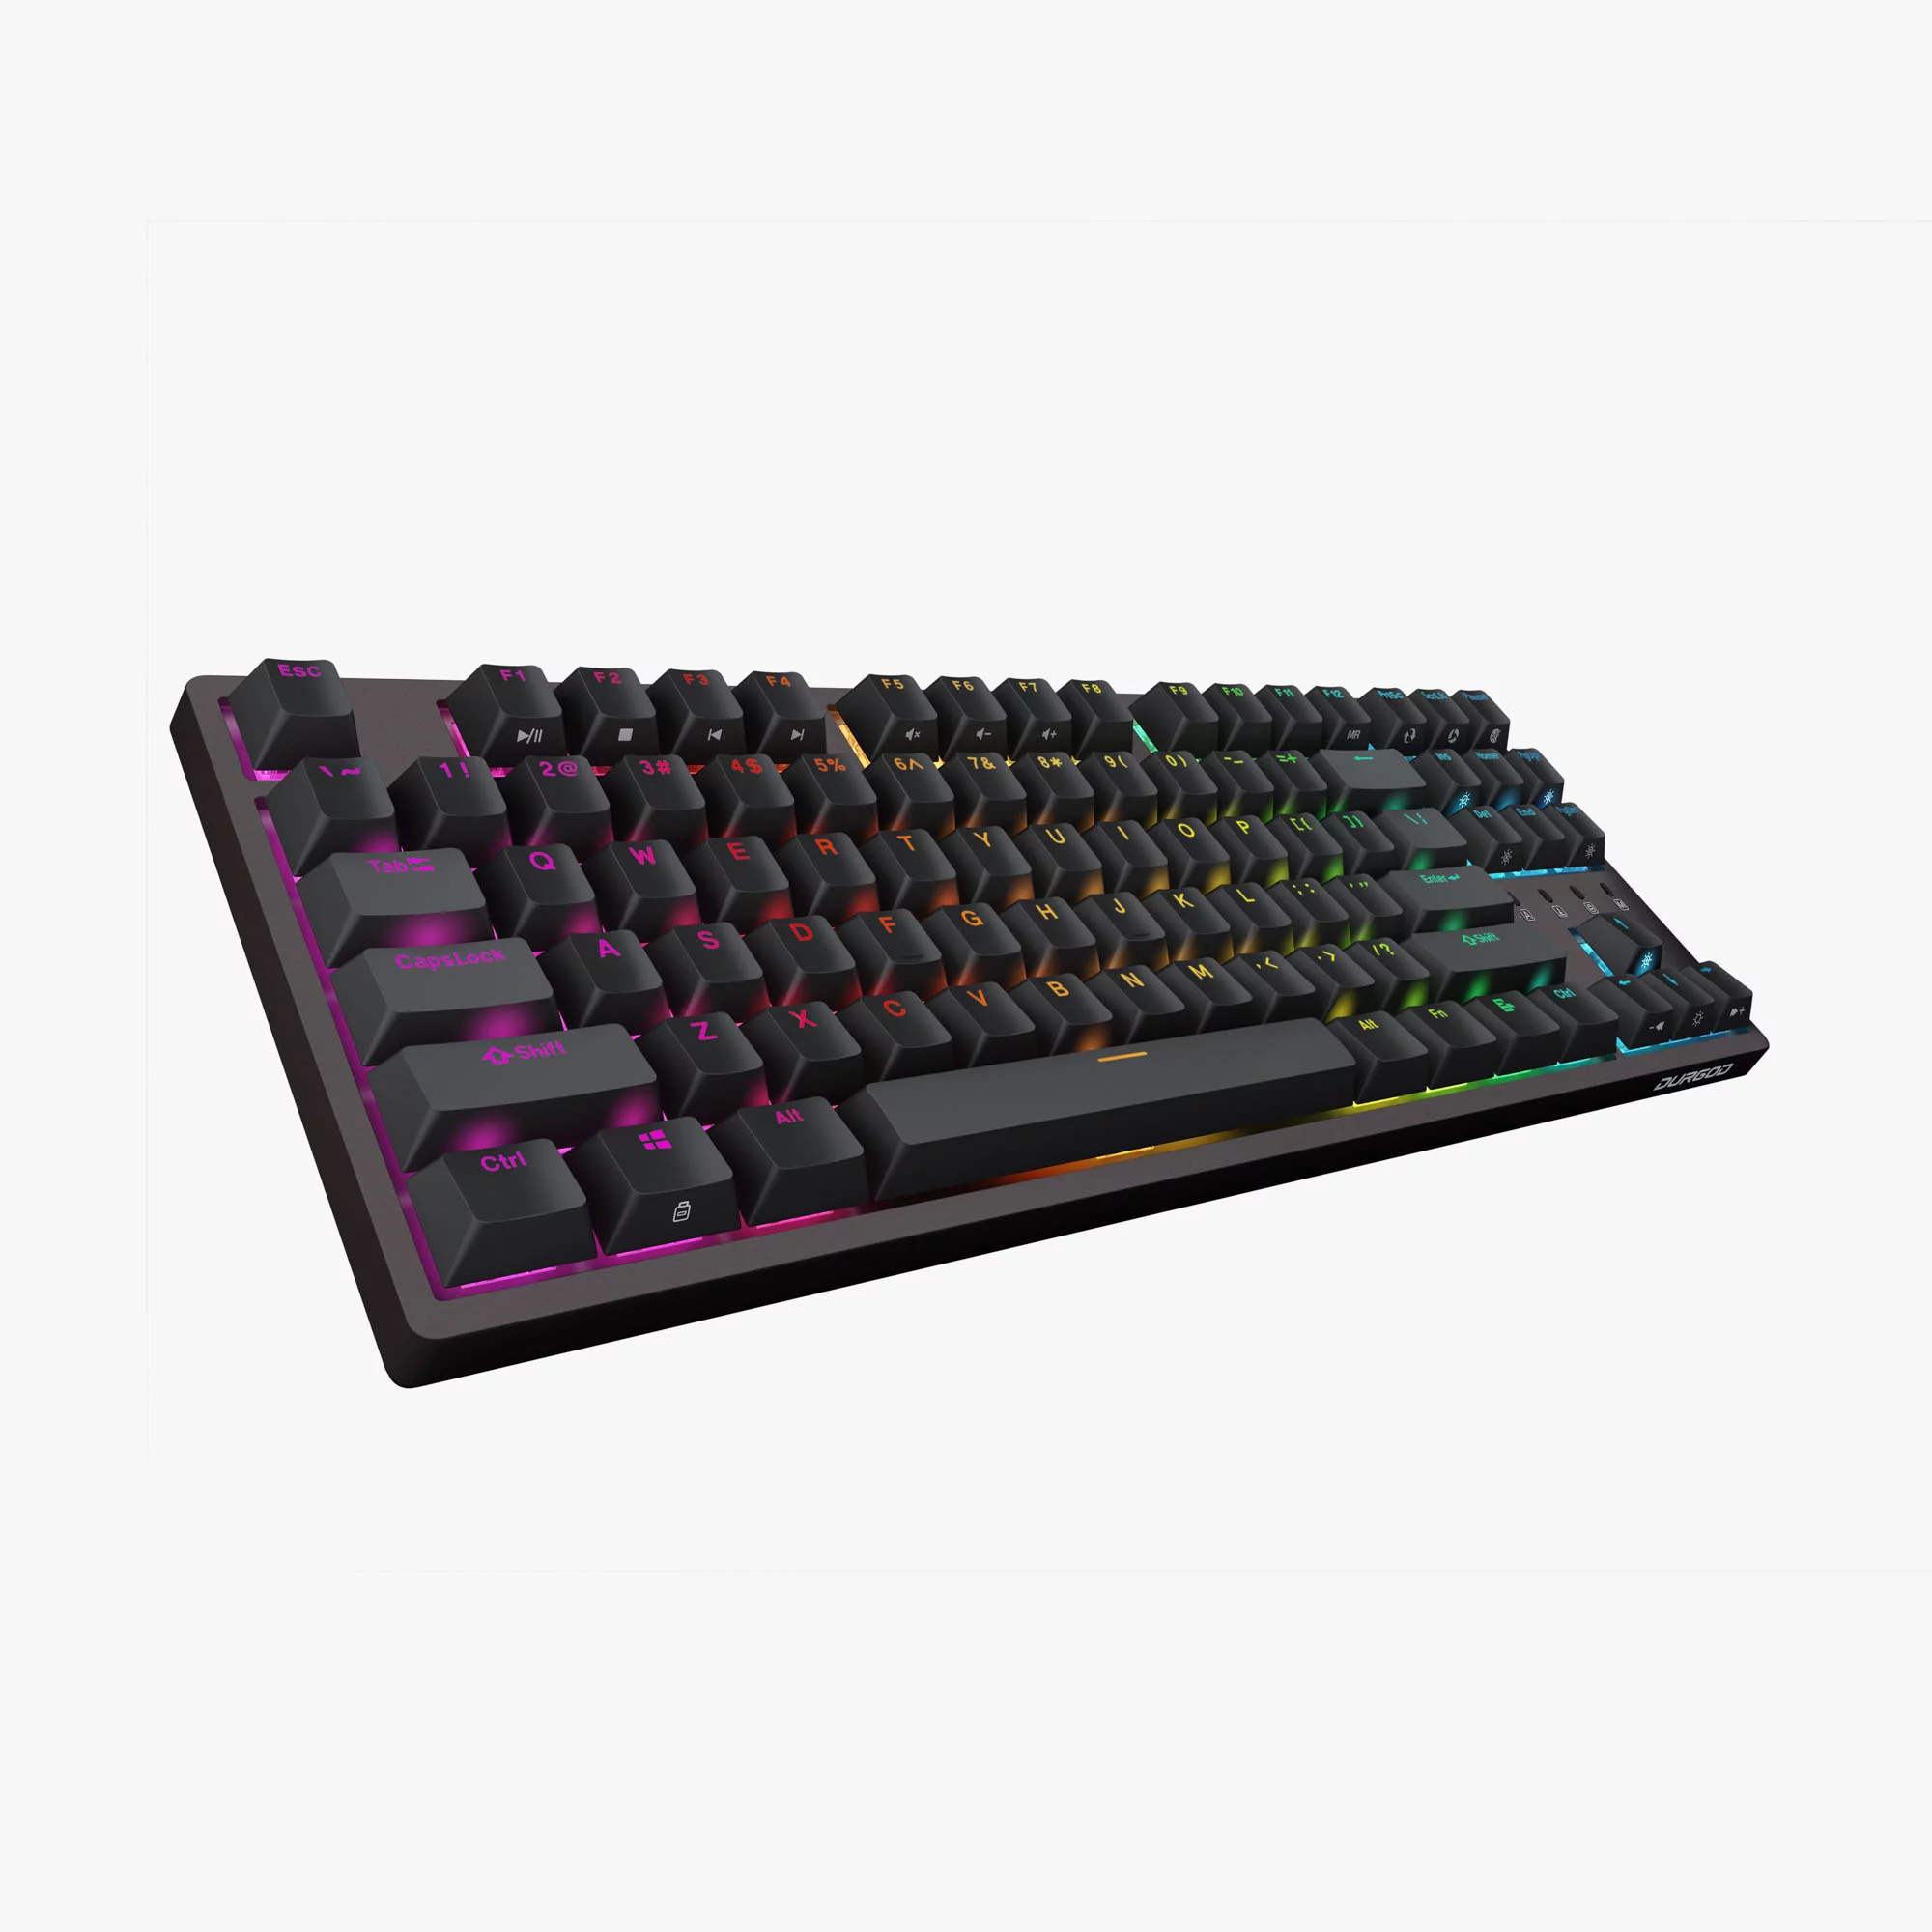 K320 RGB Mechanical Keyboard | Your Best Comrade in Gaming Batterfield